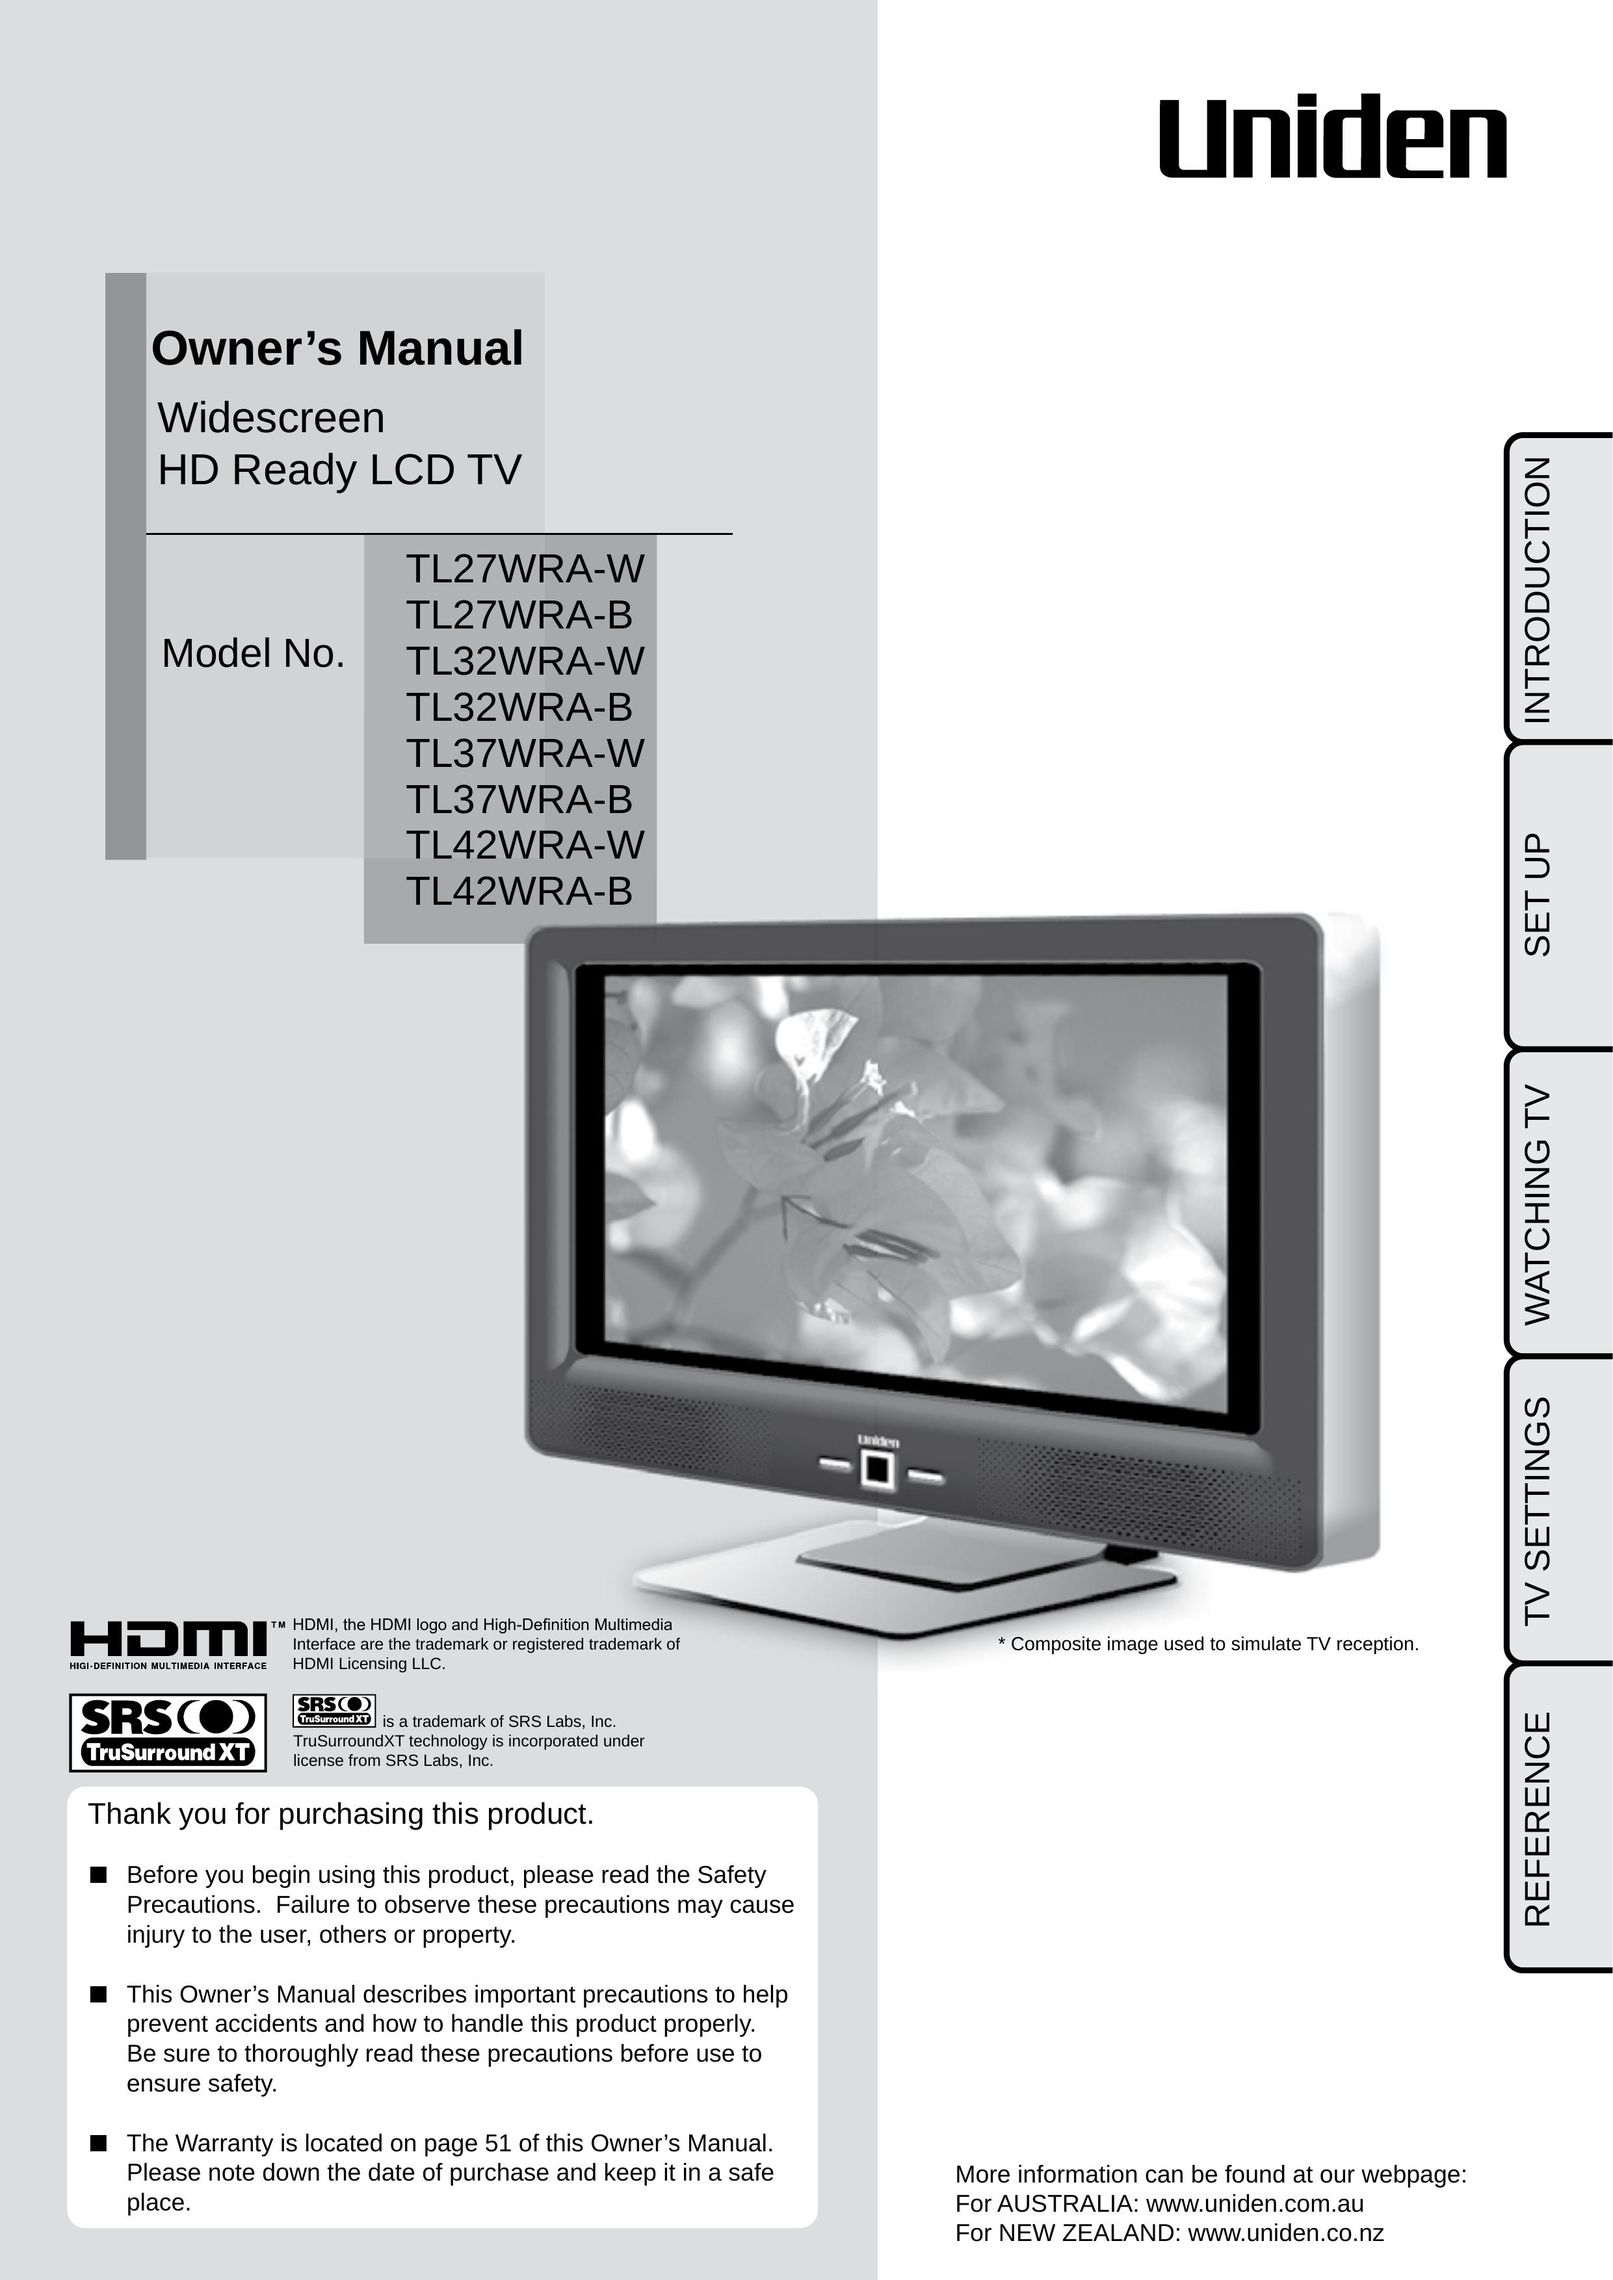 Uniden TL37WRA-W Flat Panel Television User Manual